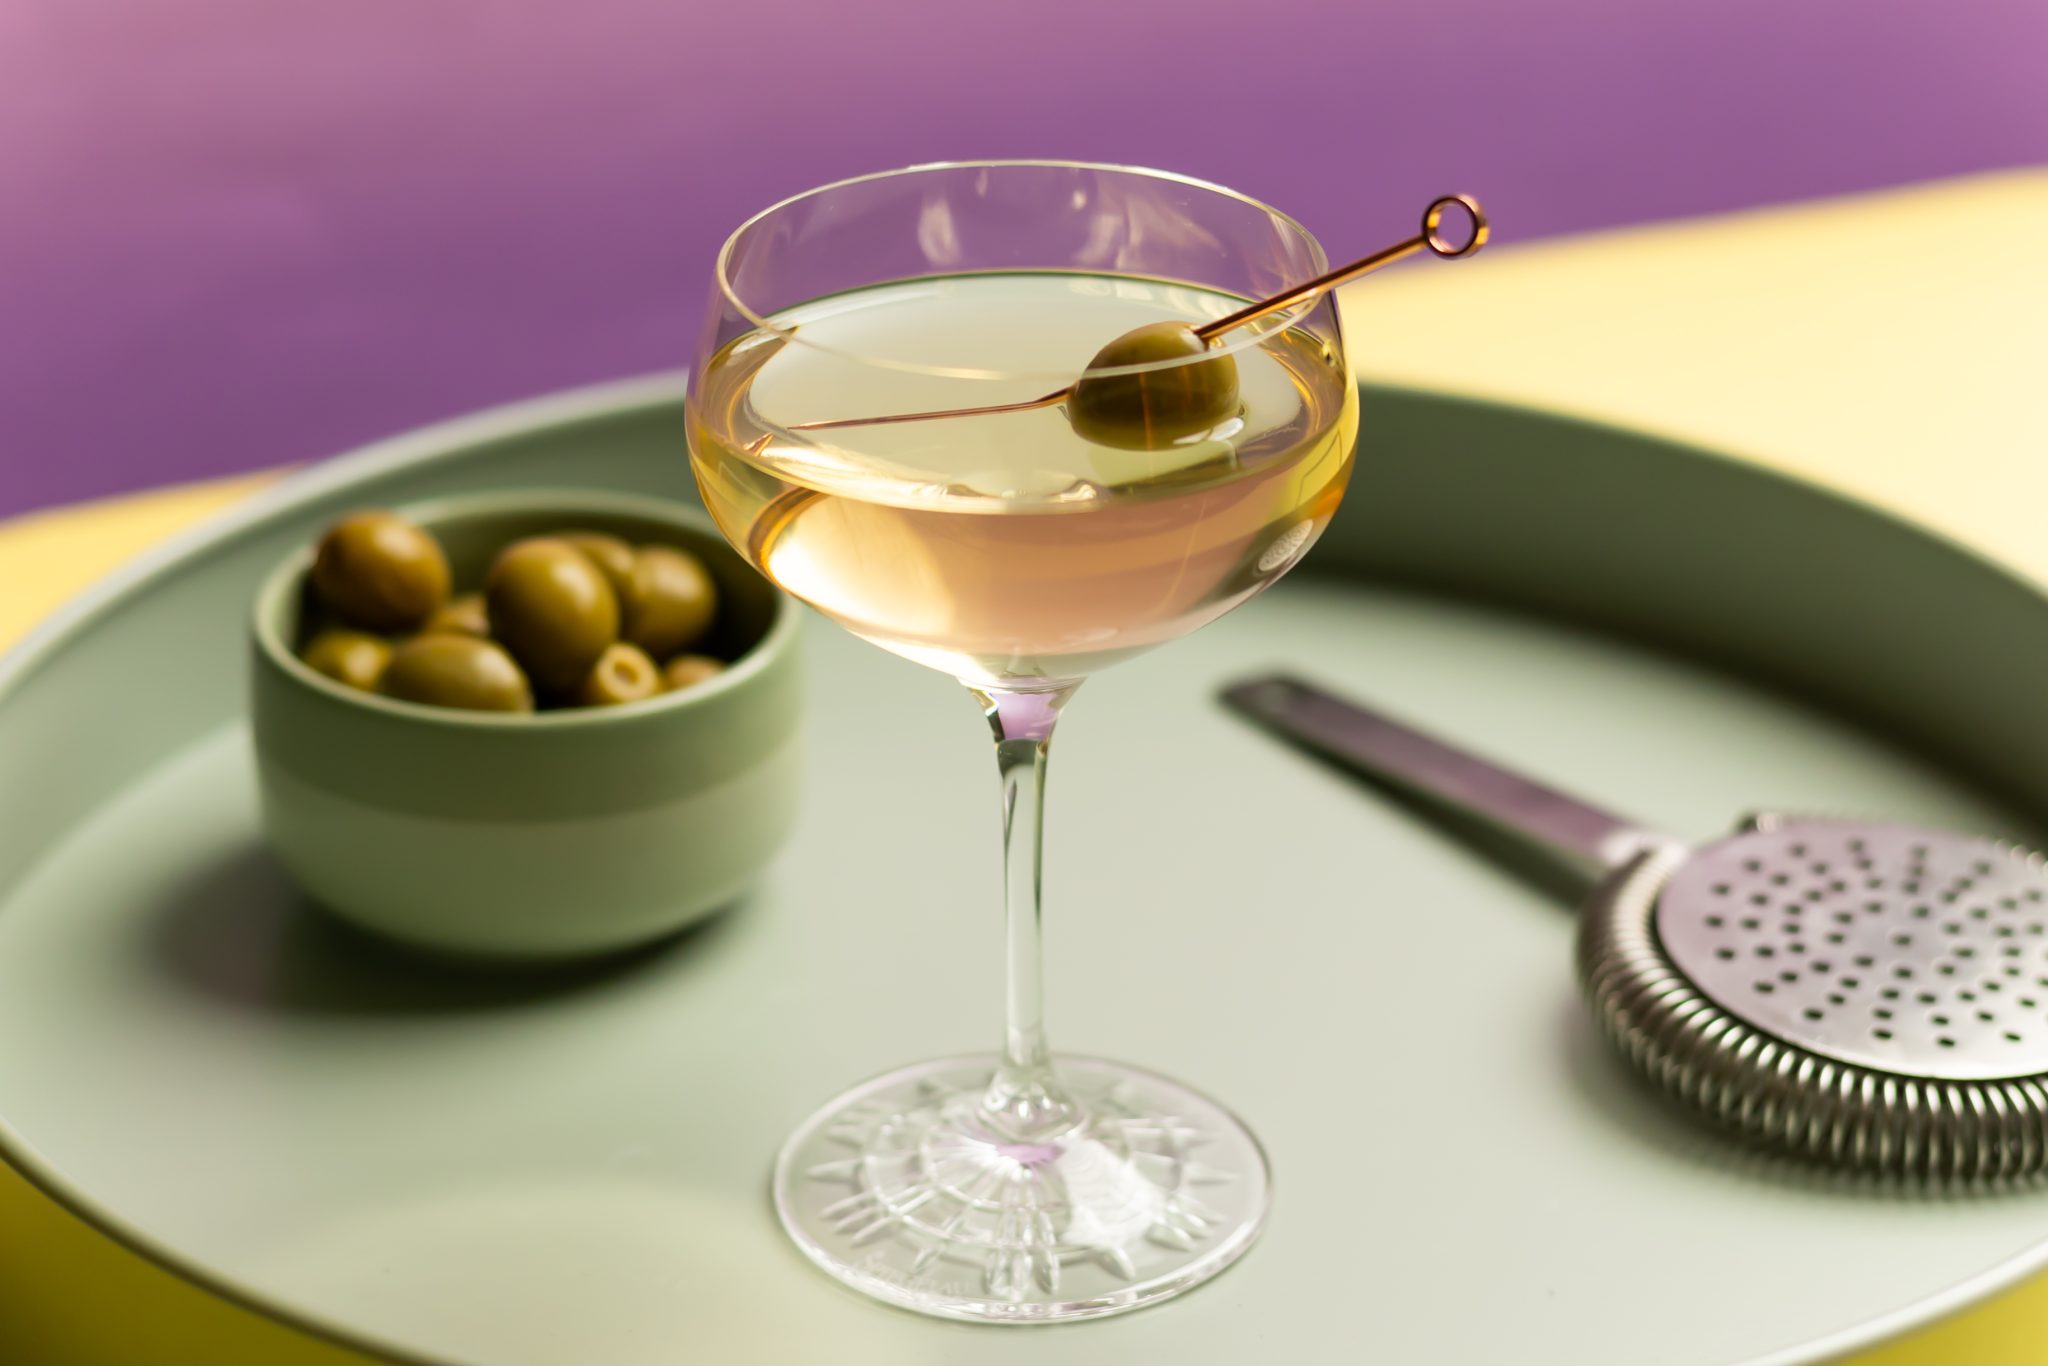 A side shot of a Mezcal Martini cocktail in a martini glass on a turquoise tray surrounded by a strainer and a bowl with olives inside, in front of a purple background